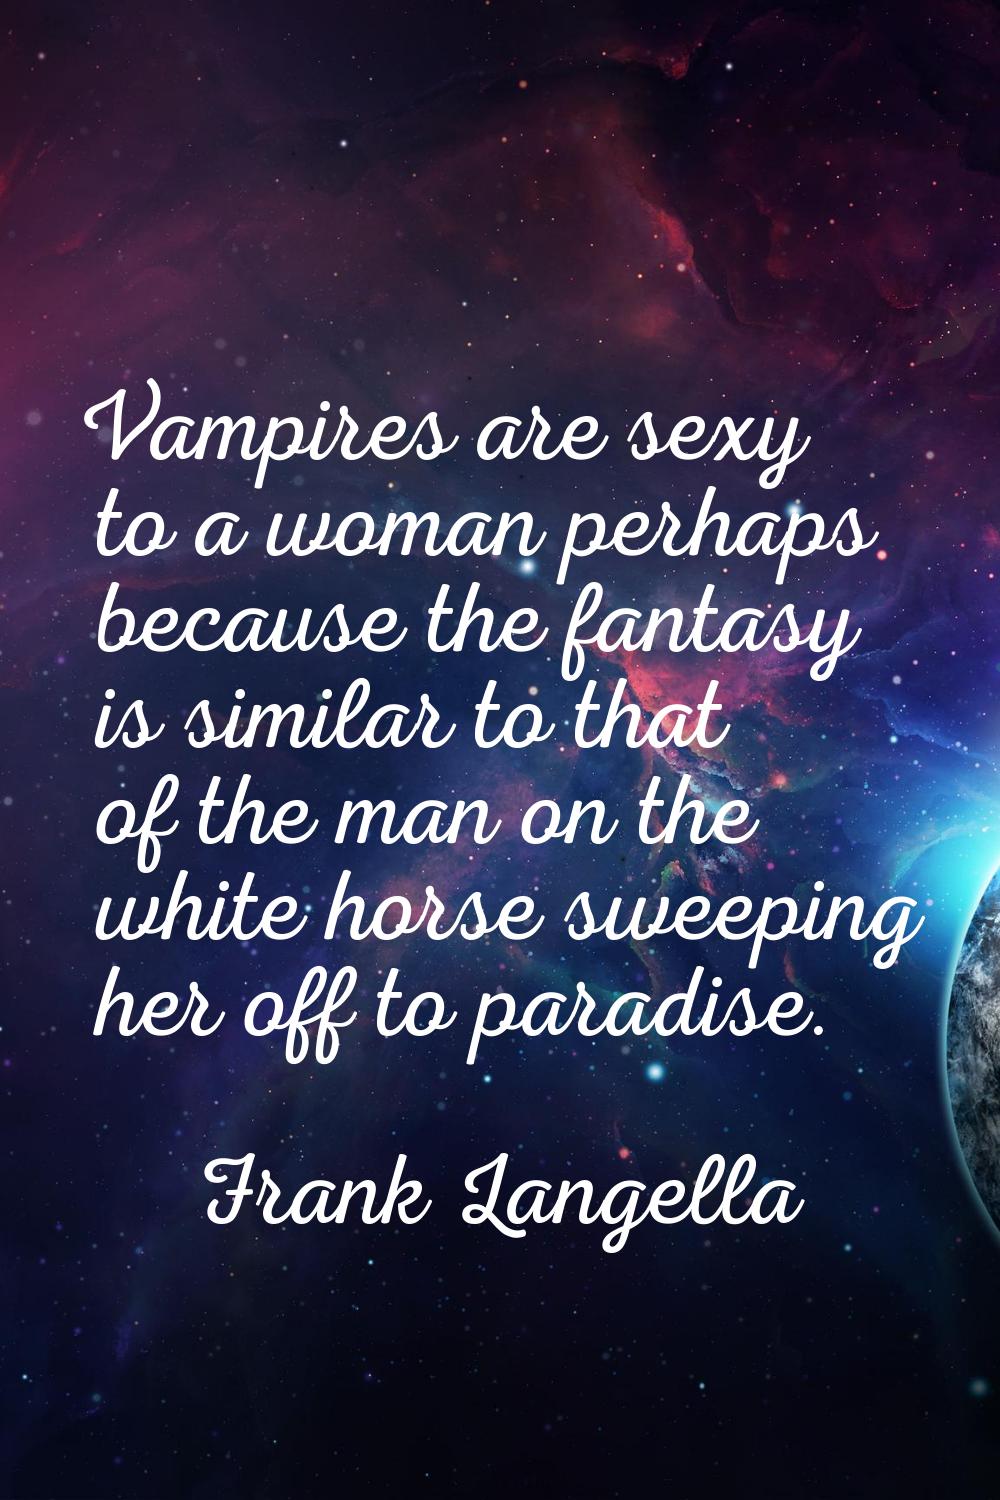 Vampires are sexy to a woman perhaps because the fantasy is similar to that of the man on the white